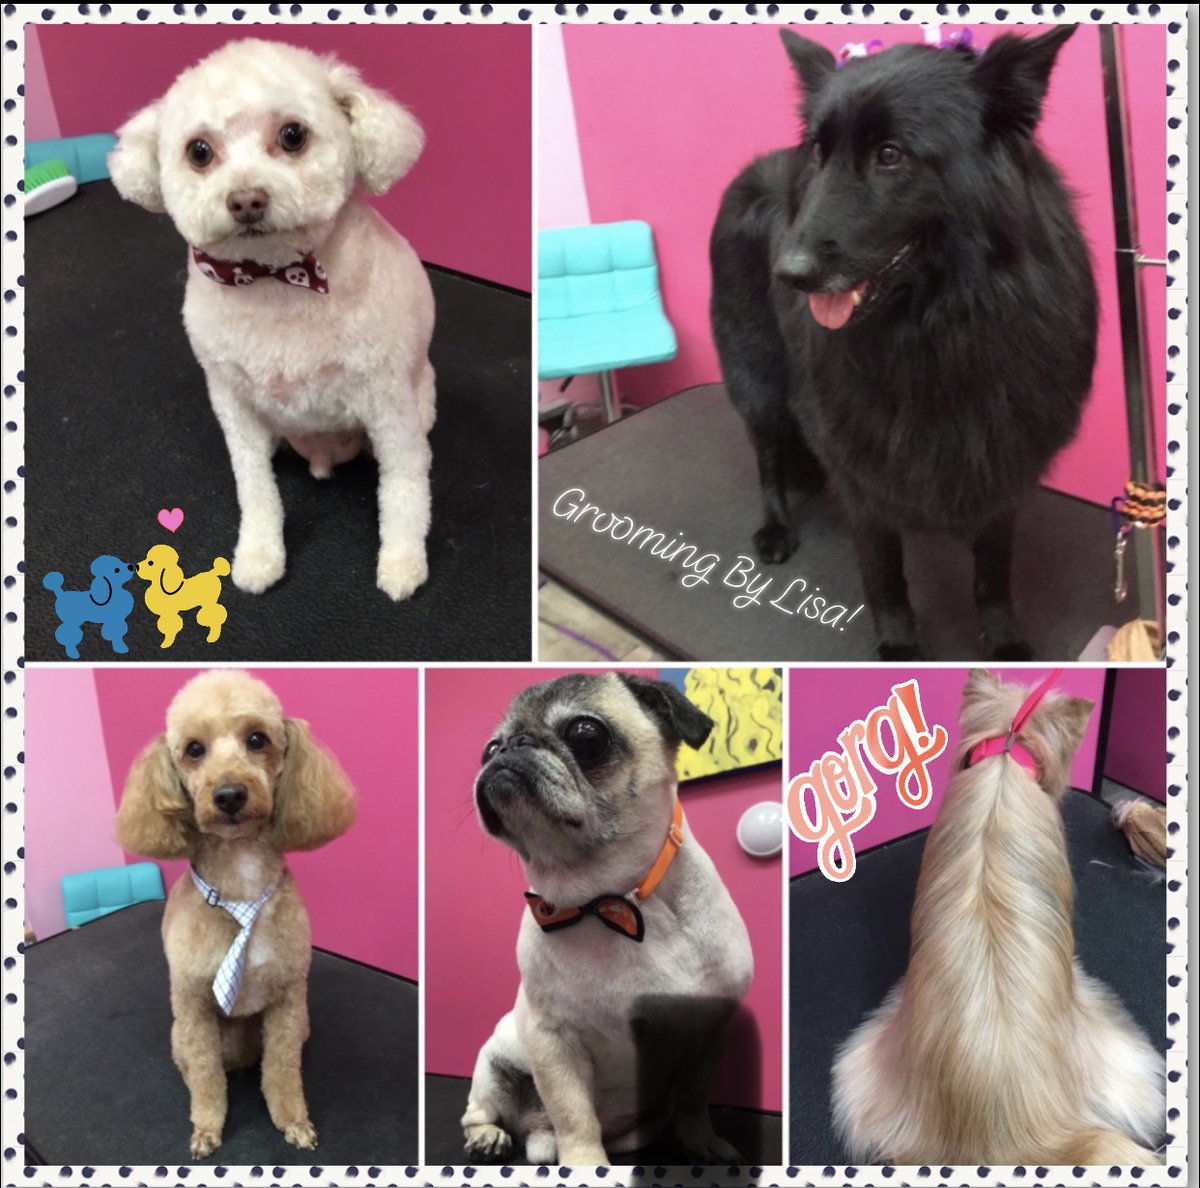 Come groom with us! Join the cuteness pack! #poodlemadness #poodlemania #poodle #poodlesofinstagram #pug #pugelicious #pugsofinstagram #yorkieofinstagram #yorkiefabulous #yorki #doodlesofinstagram #doodles #germanshepherd #simplygorgeous #shepherdsofinstagram #wgbhenderson byLisa